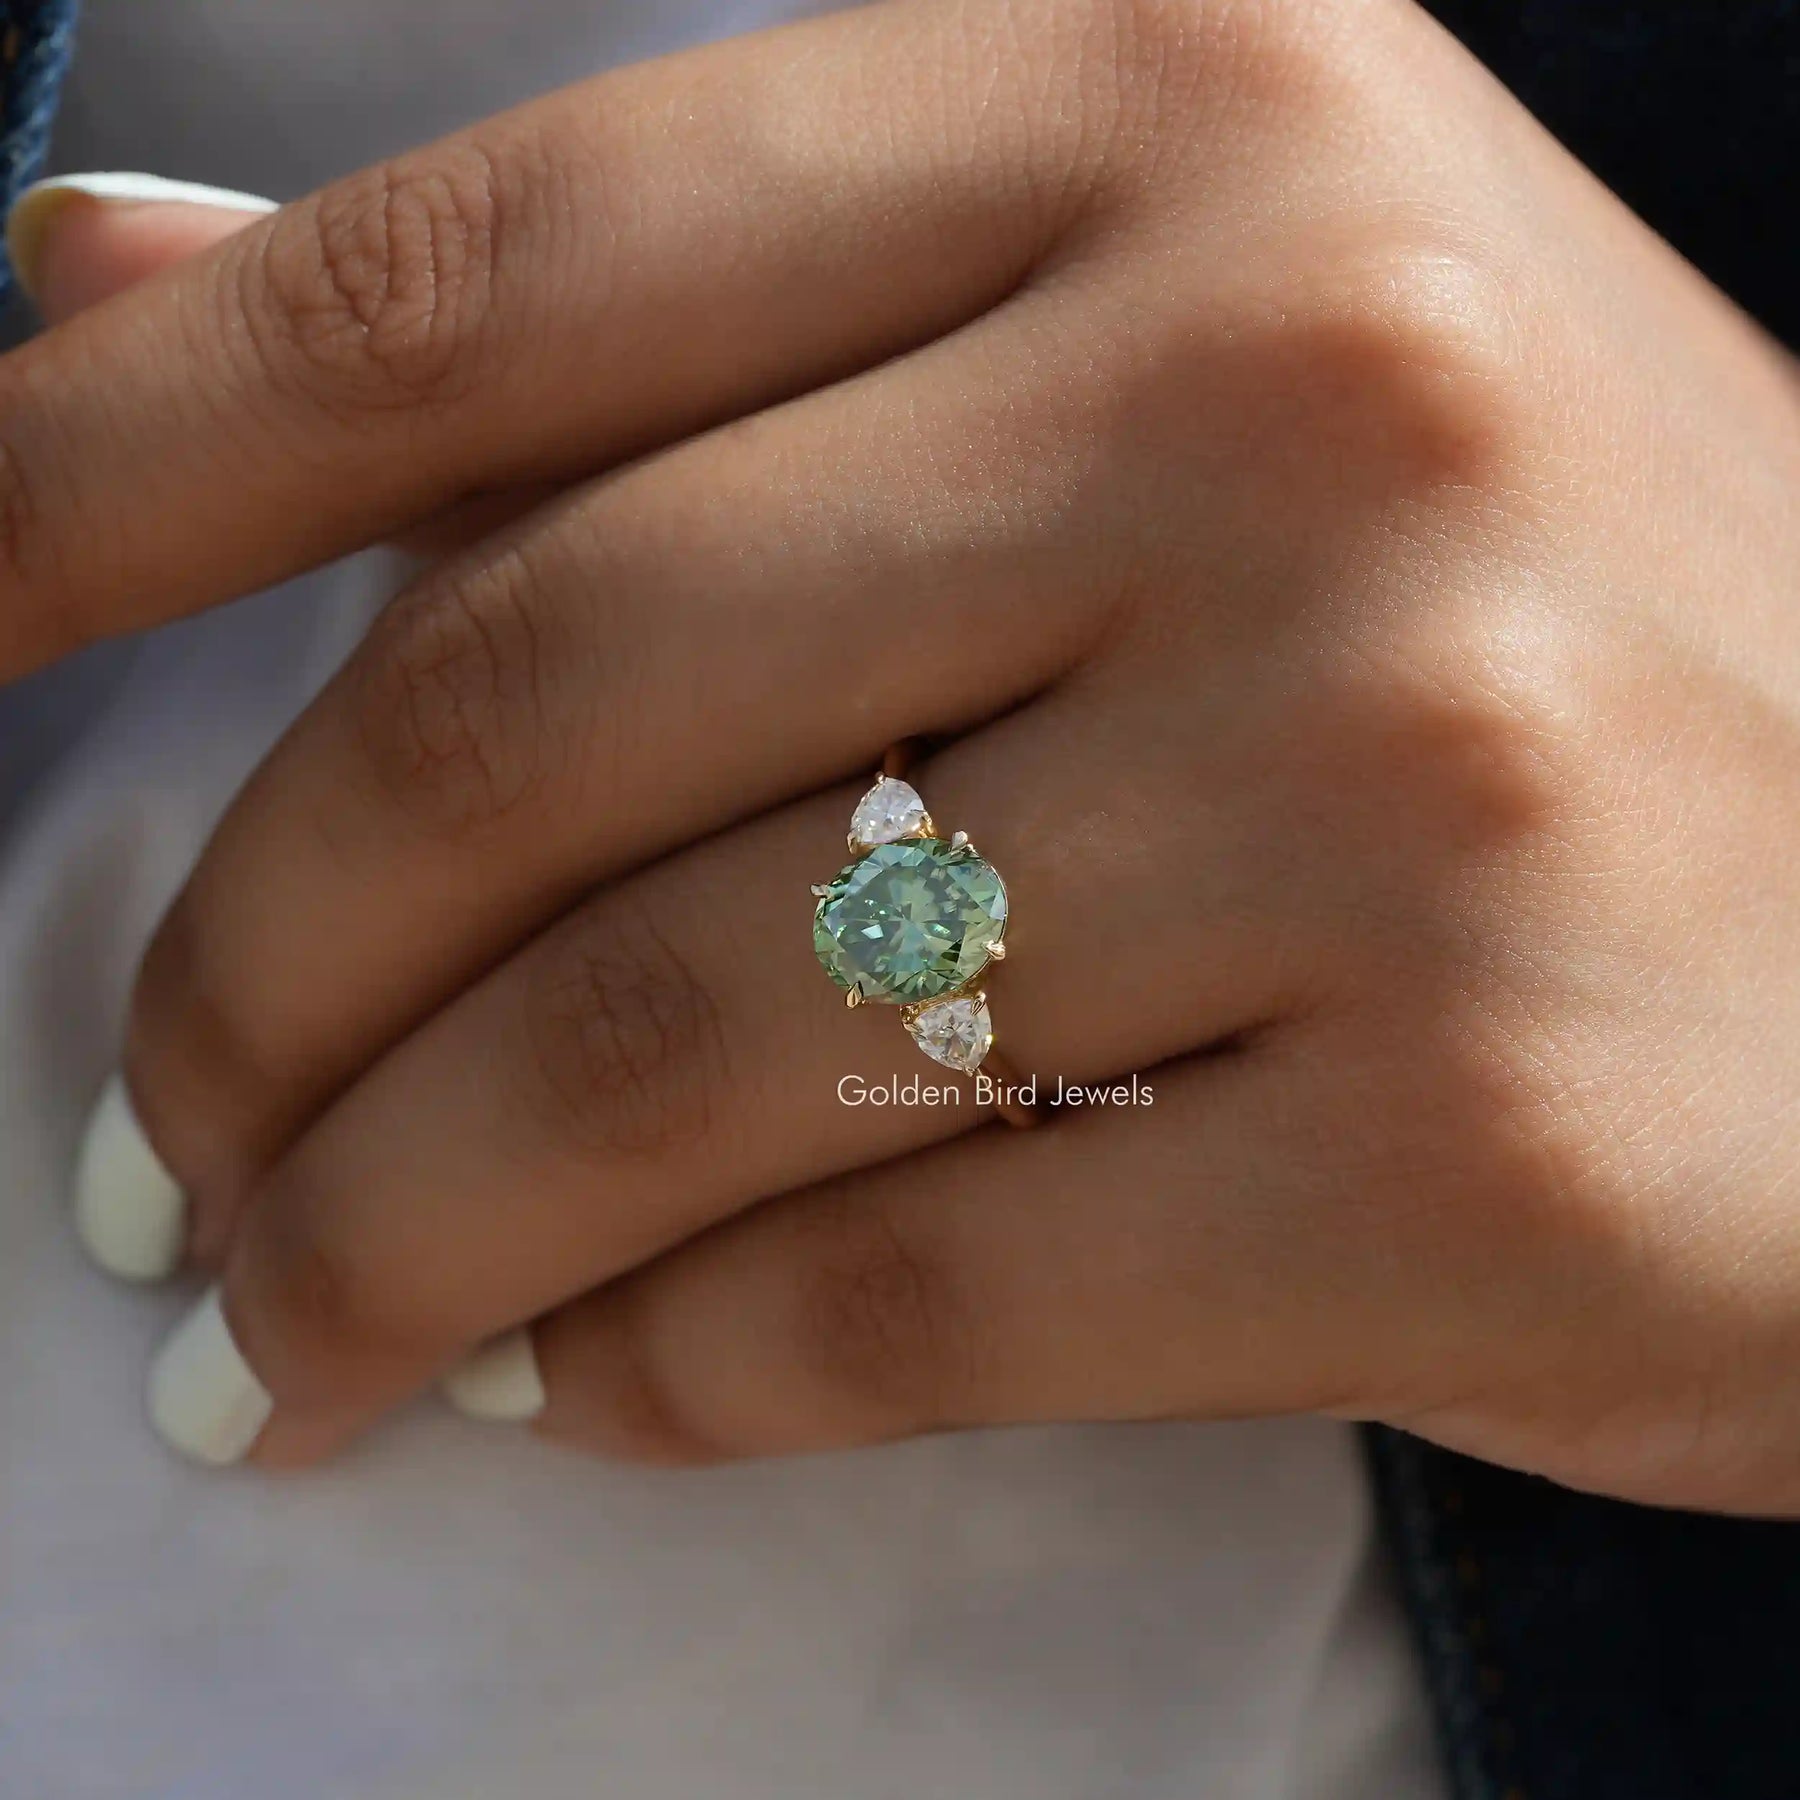 [This engagement ring crafted with green oval cut stone & trillion cut side stones]-[Golden Bird Jewels]